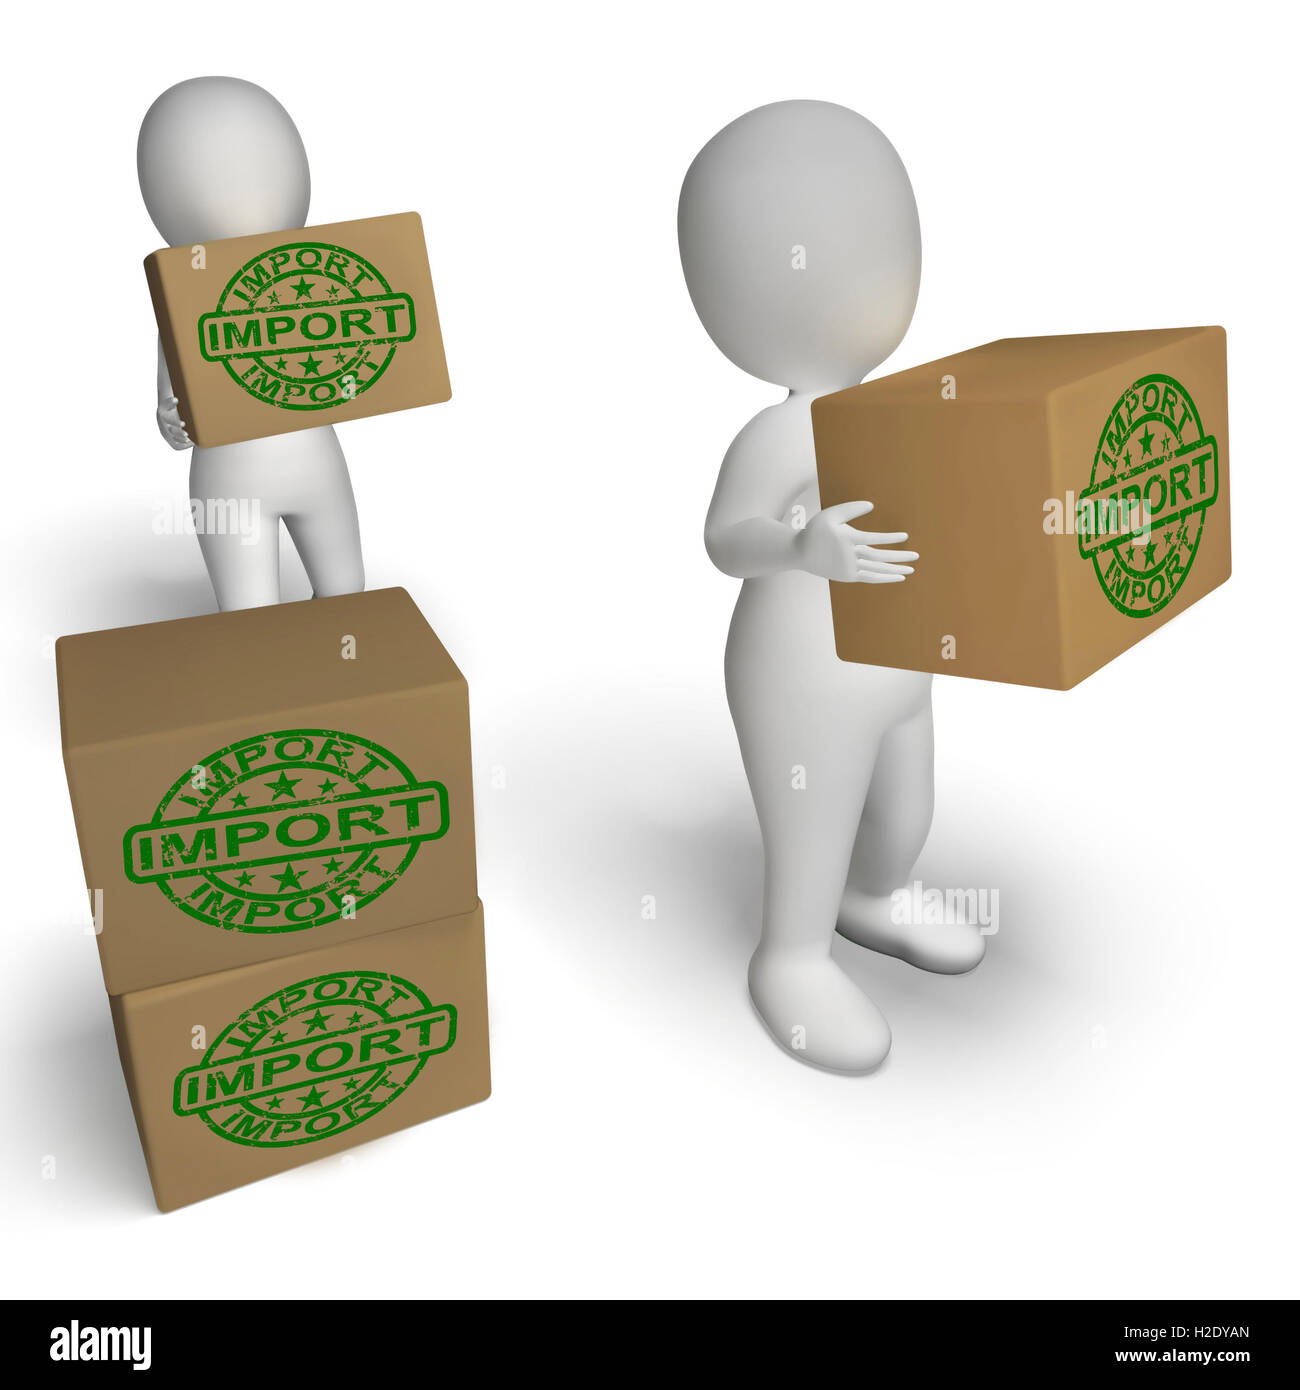 Import Boxes Show Importing Goods and Merchandise Stock Photo